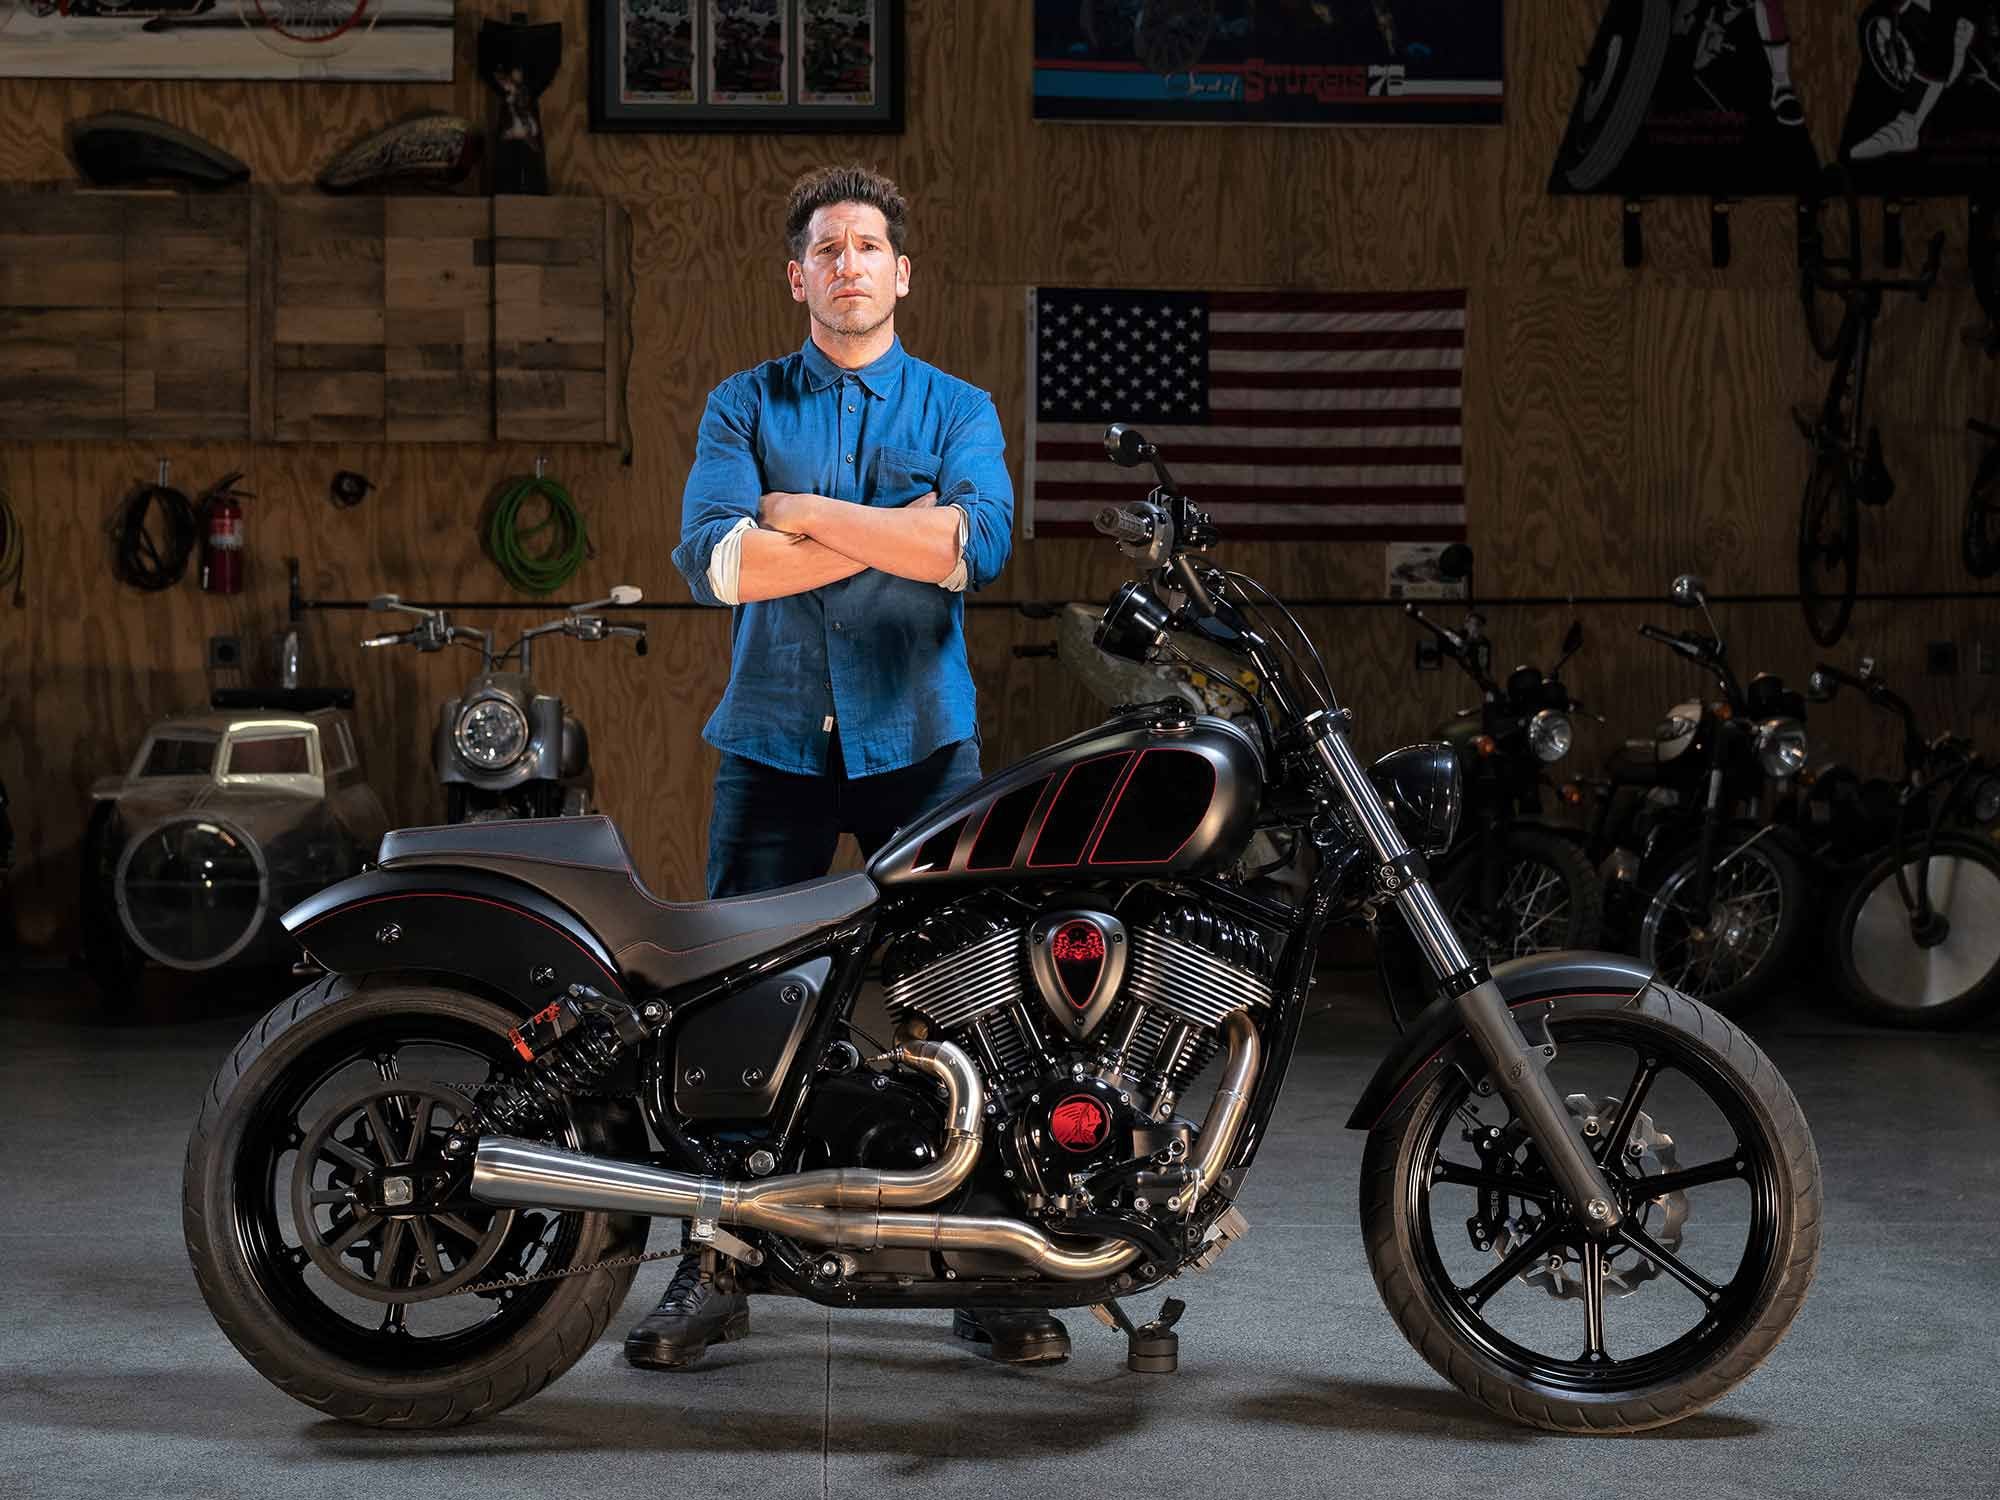 Hart designed and sized the bike for Jon Bernthal, who calls his new ride “beautiful.”